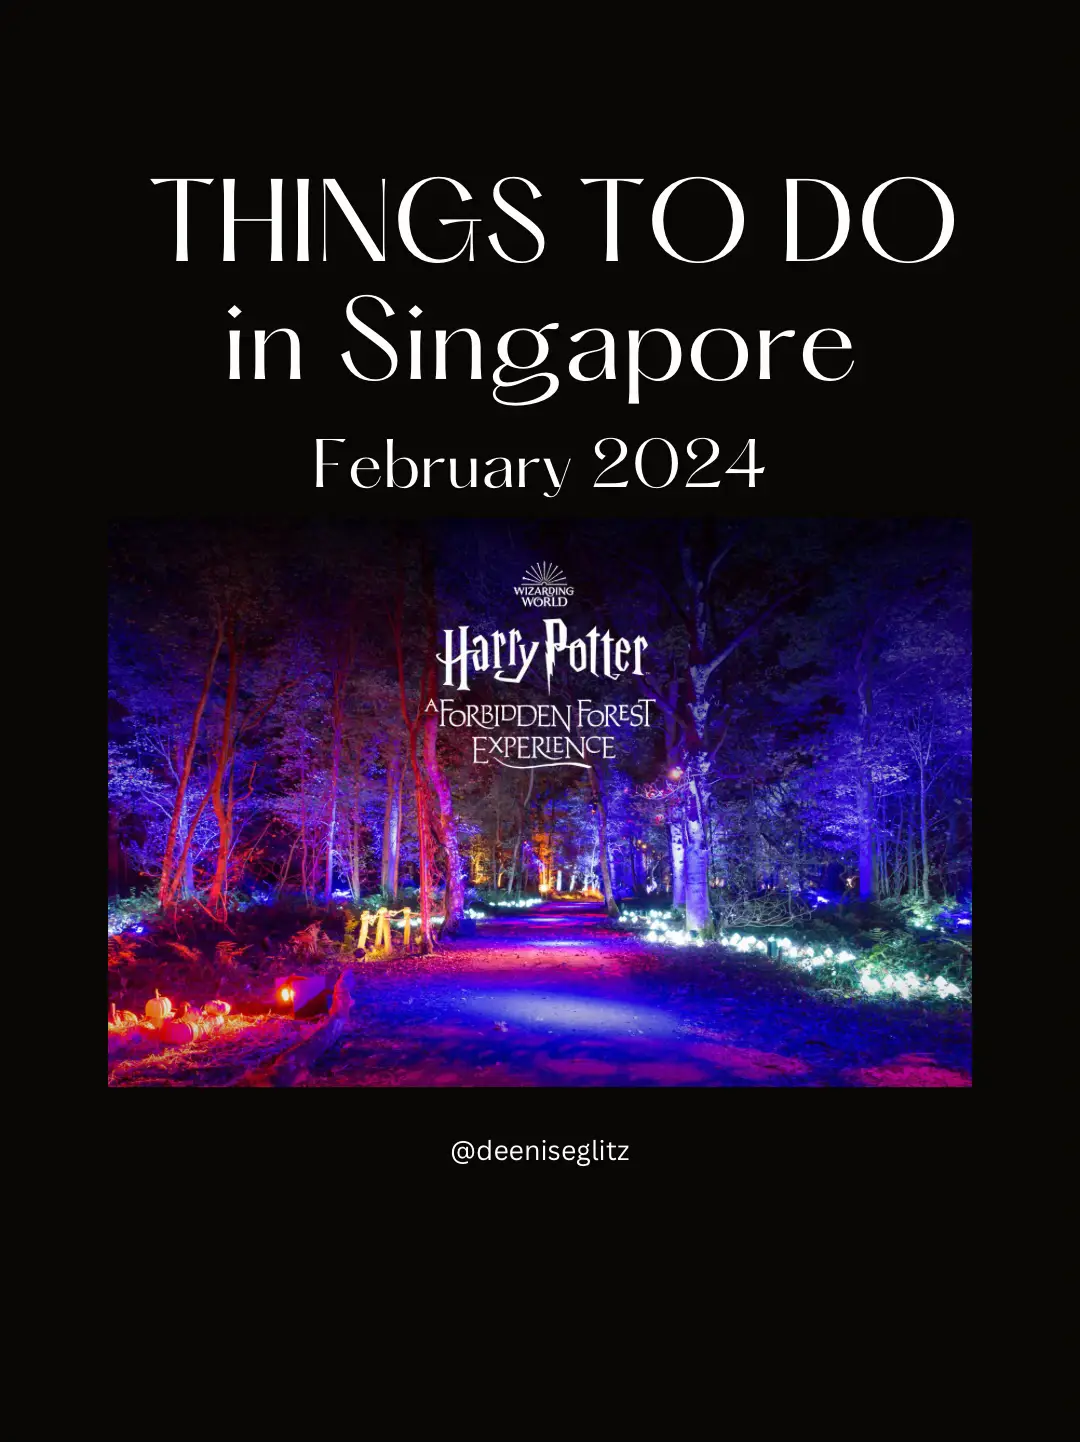 Things to do in Singapore (Feb 2024)'s images